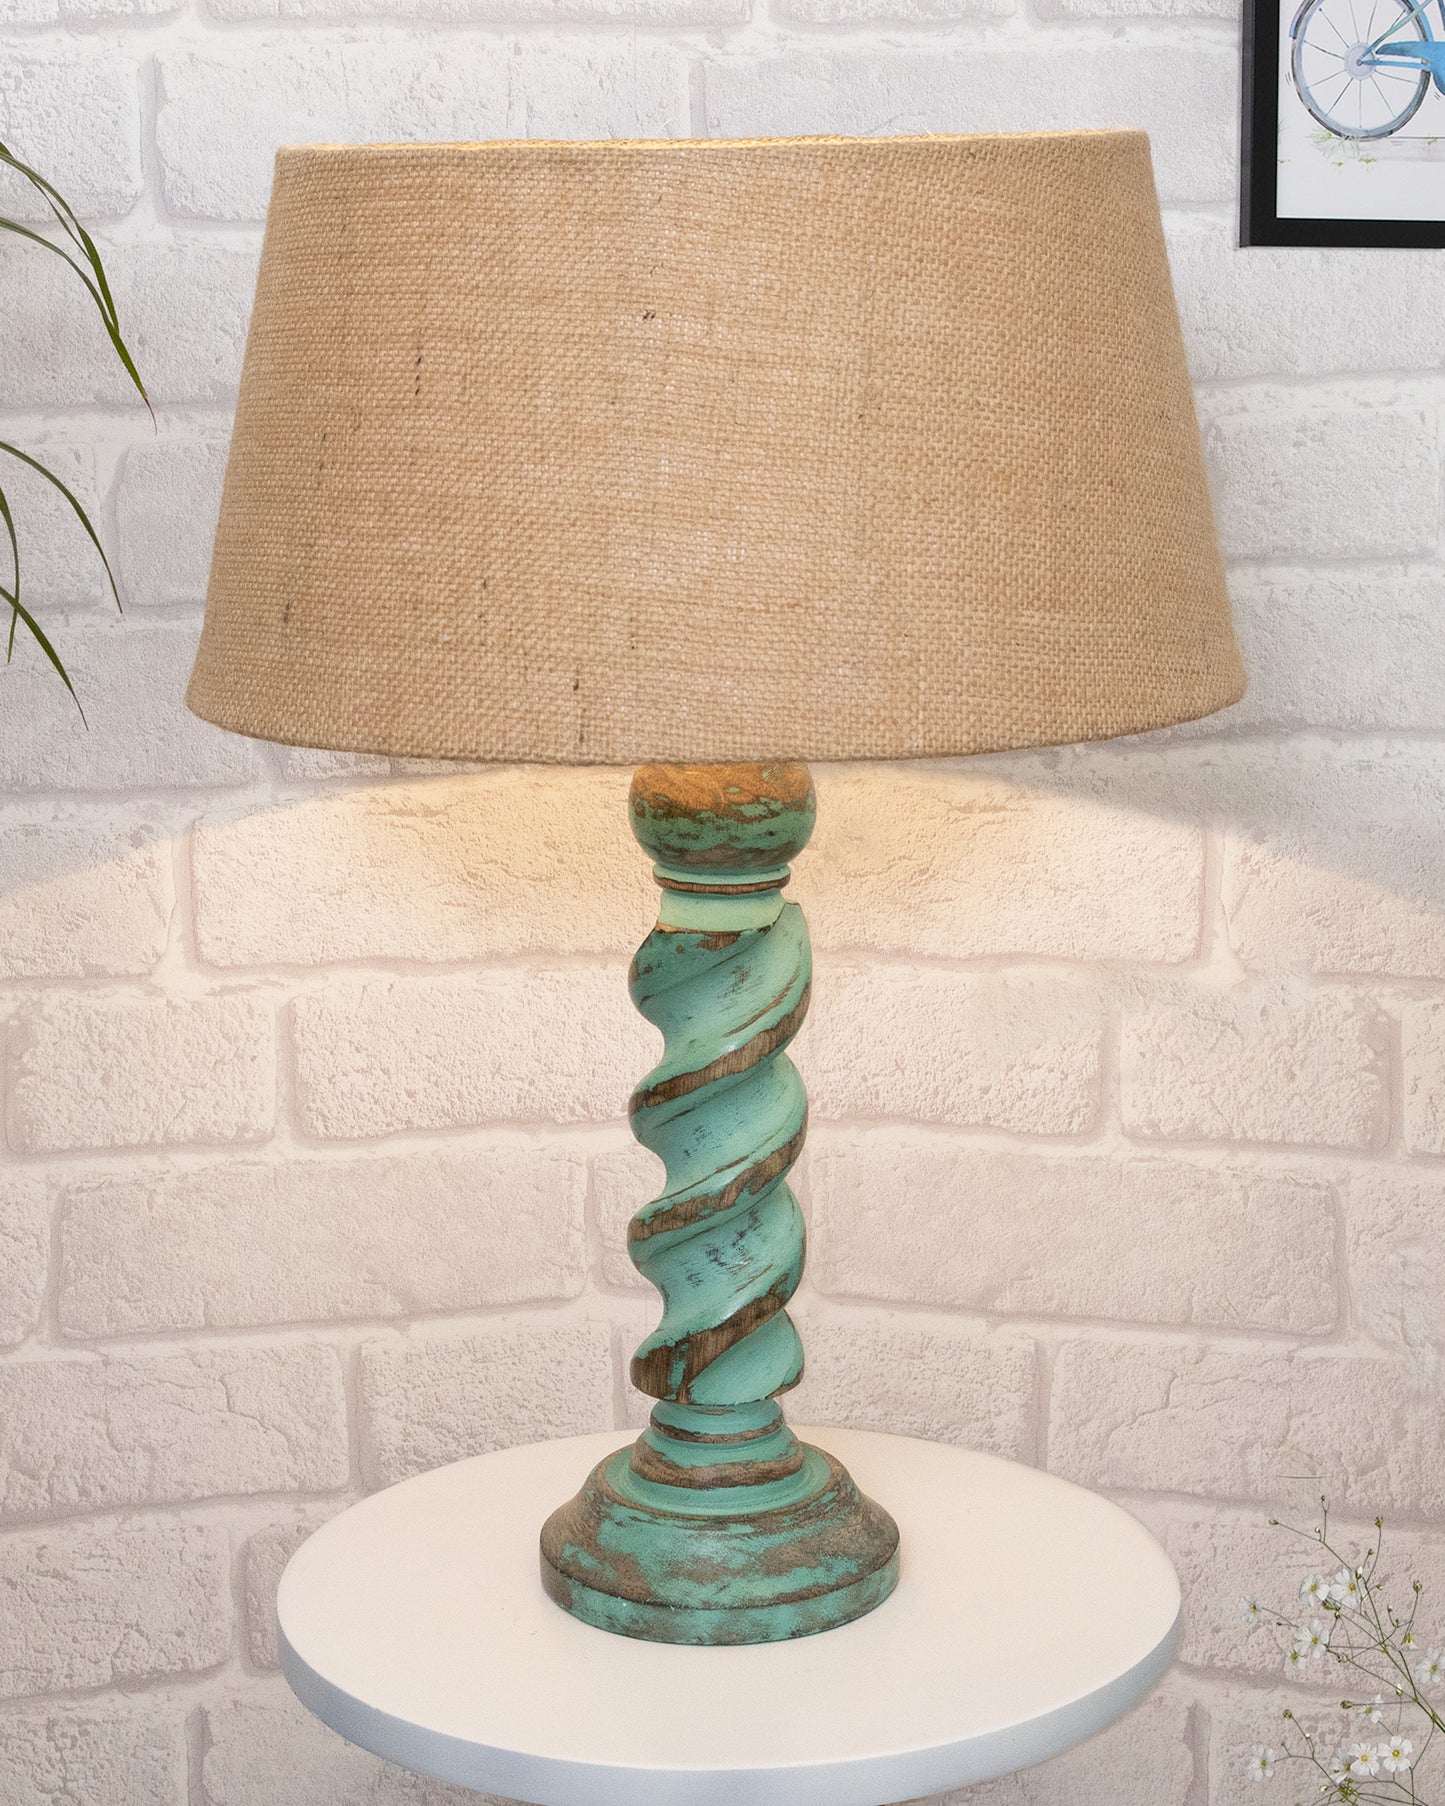 Signature Rustic Rope Algae Table Lamp With Jute Drum Shade, Farmhouse, Living Room, Bedroom, House Bedside Nightstand, Home, Office, Reading Light